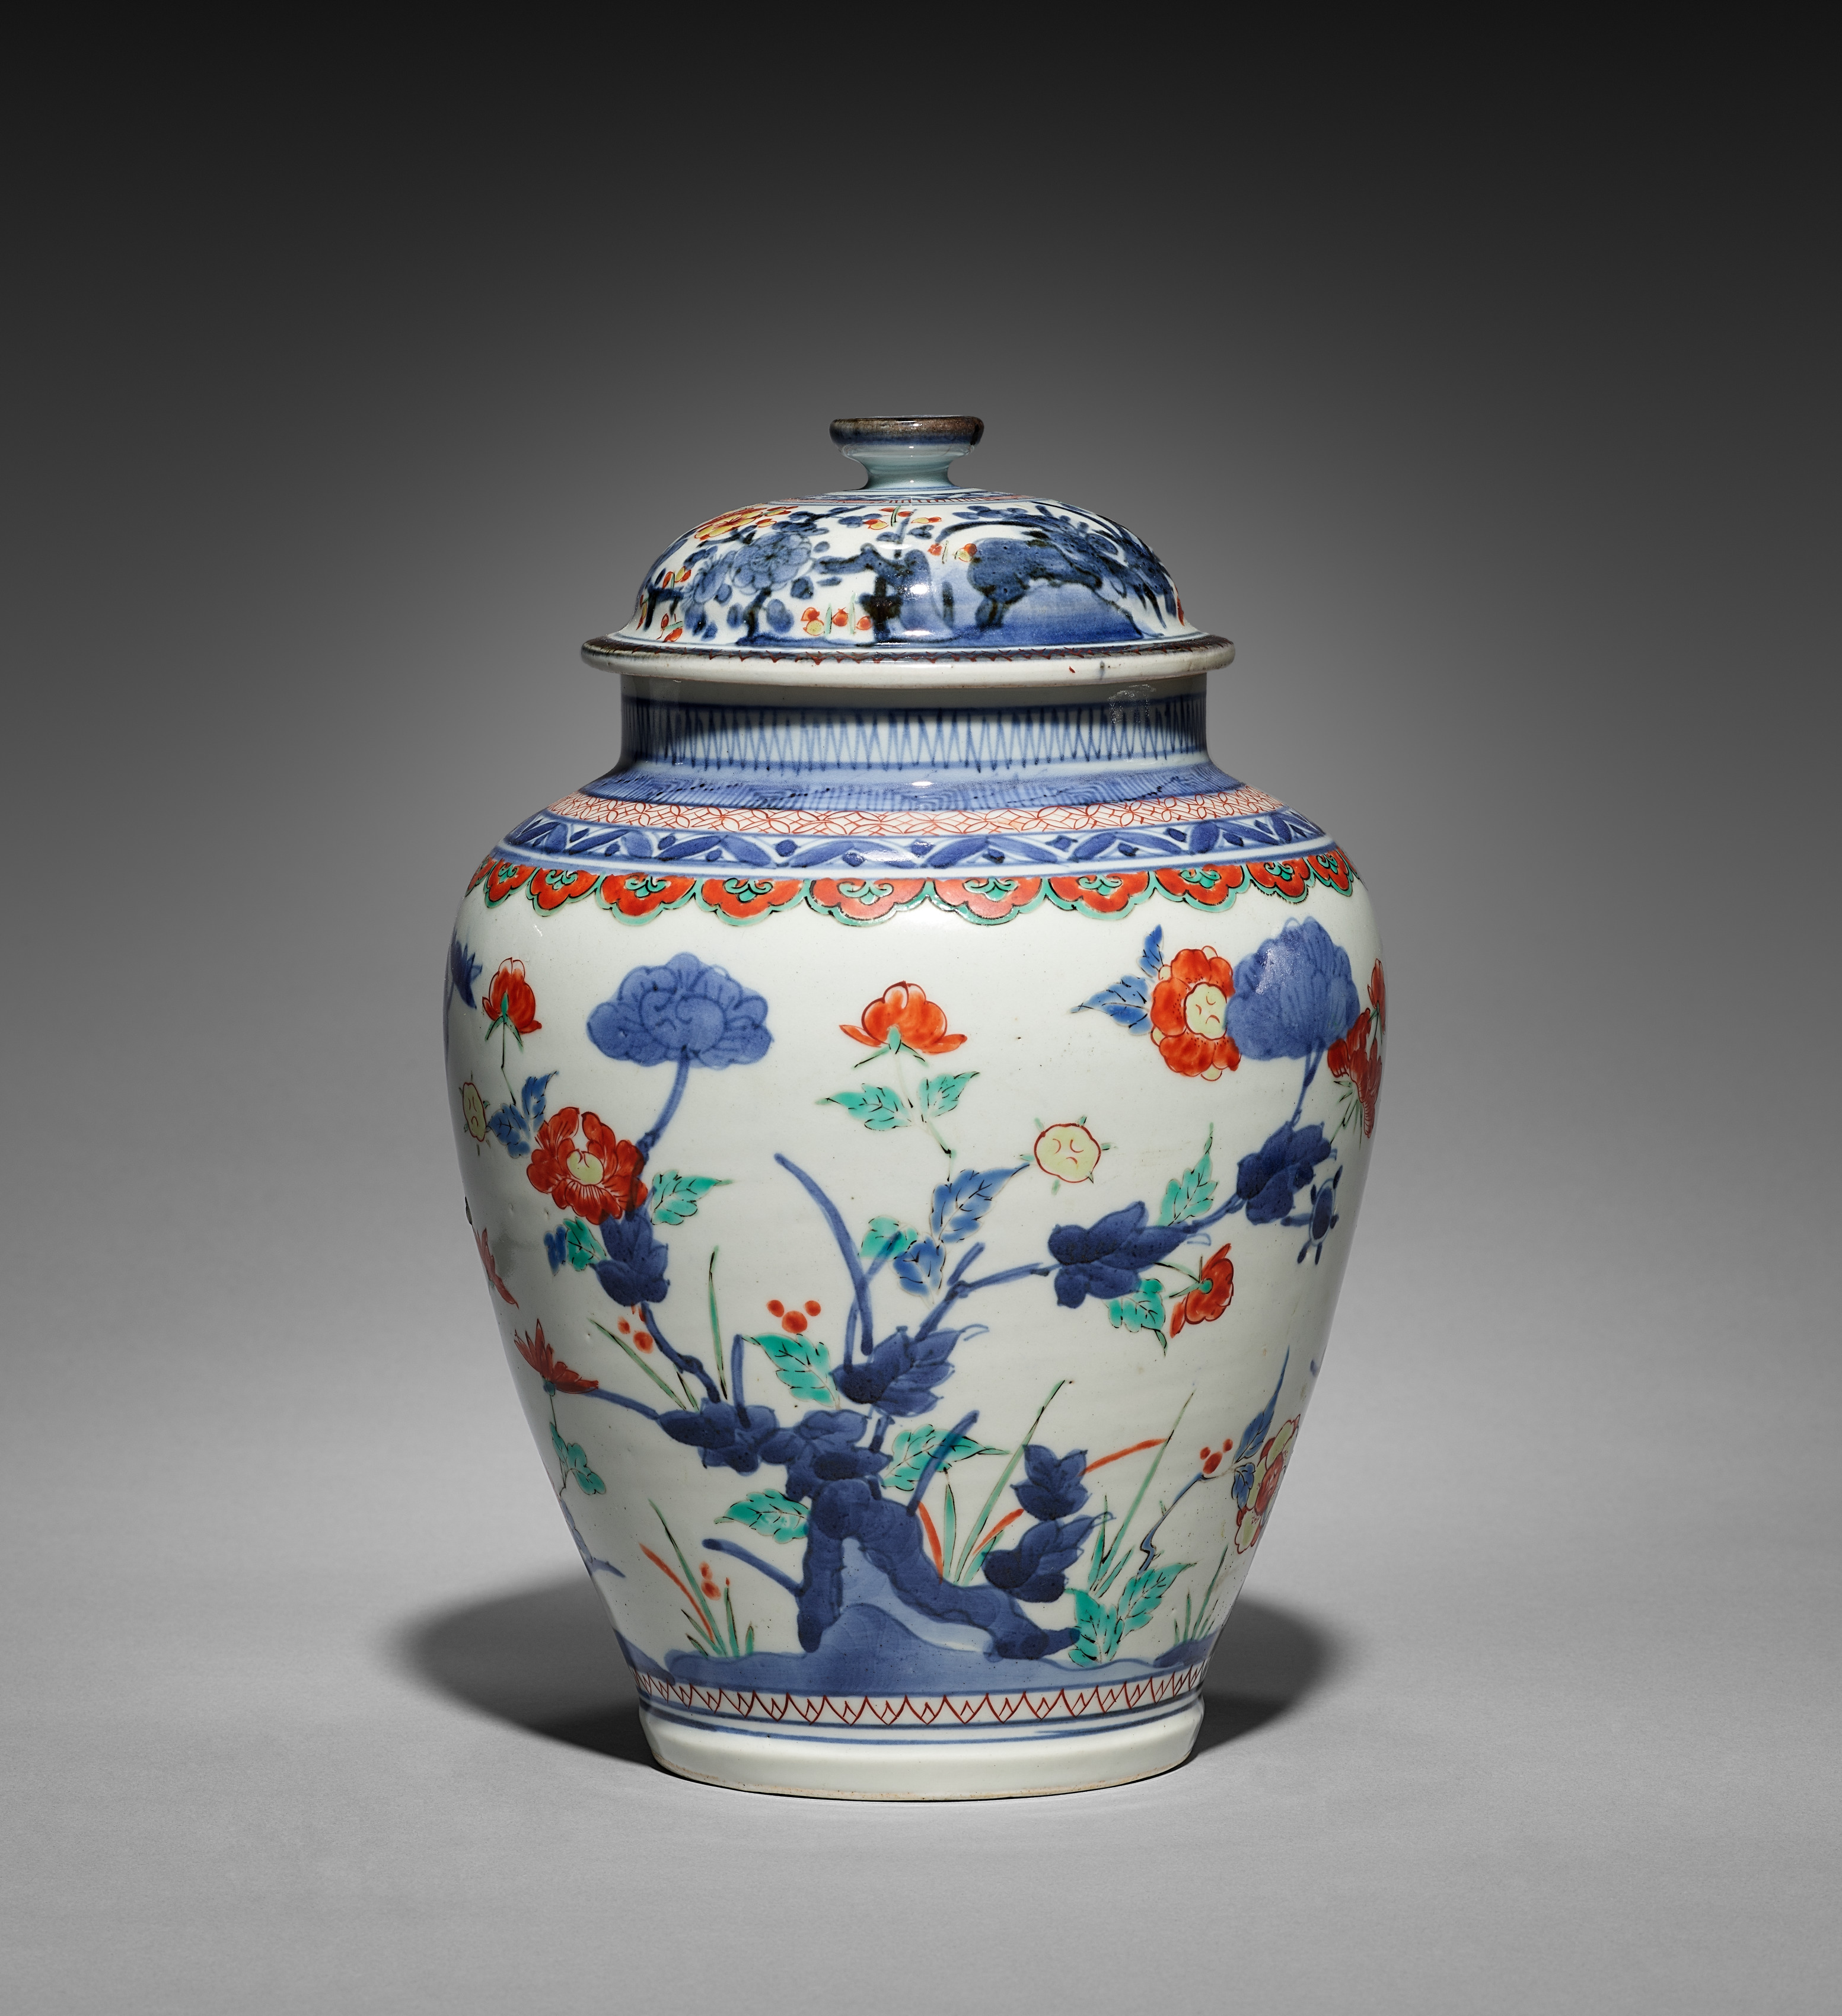 Covered Jar with Chrysanthemums, Peonies, and Plum